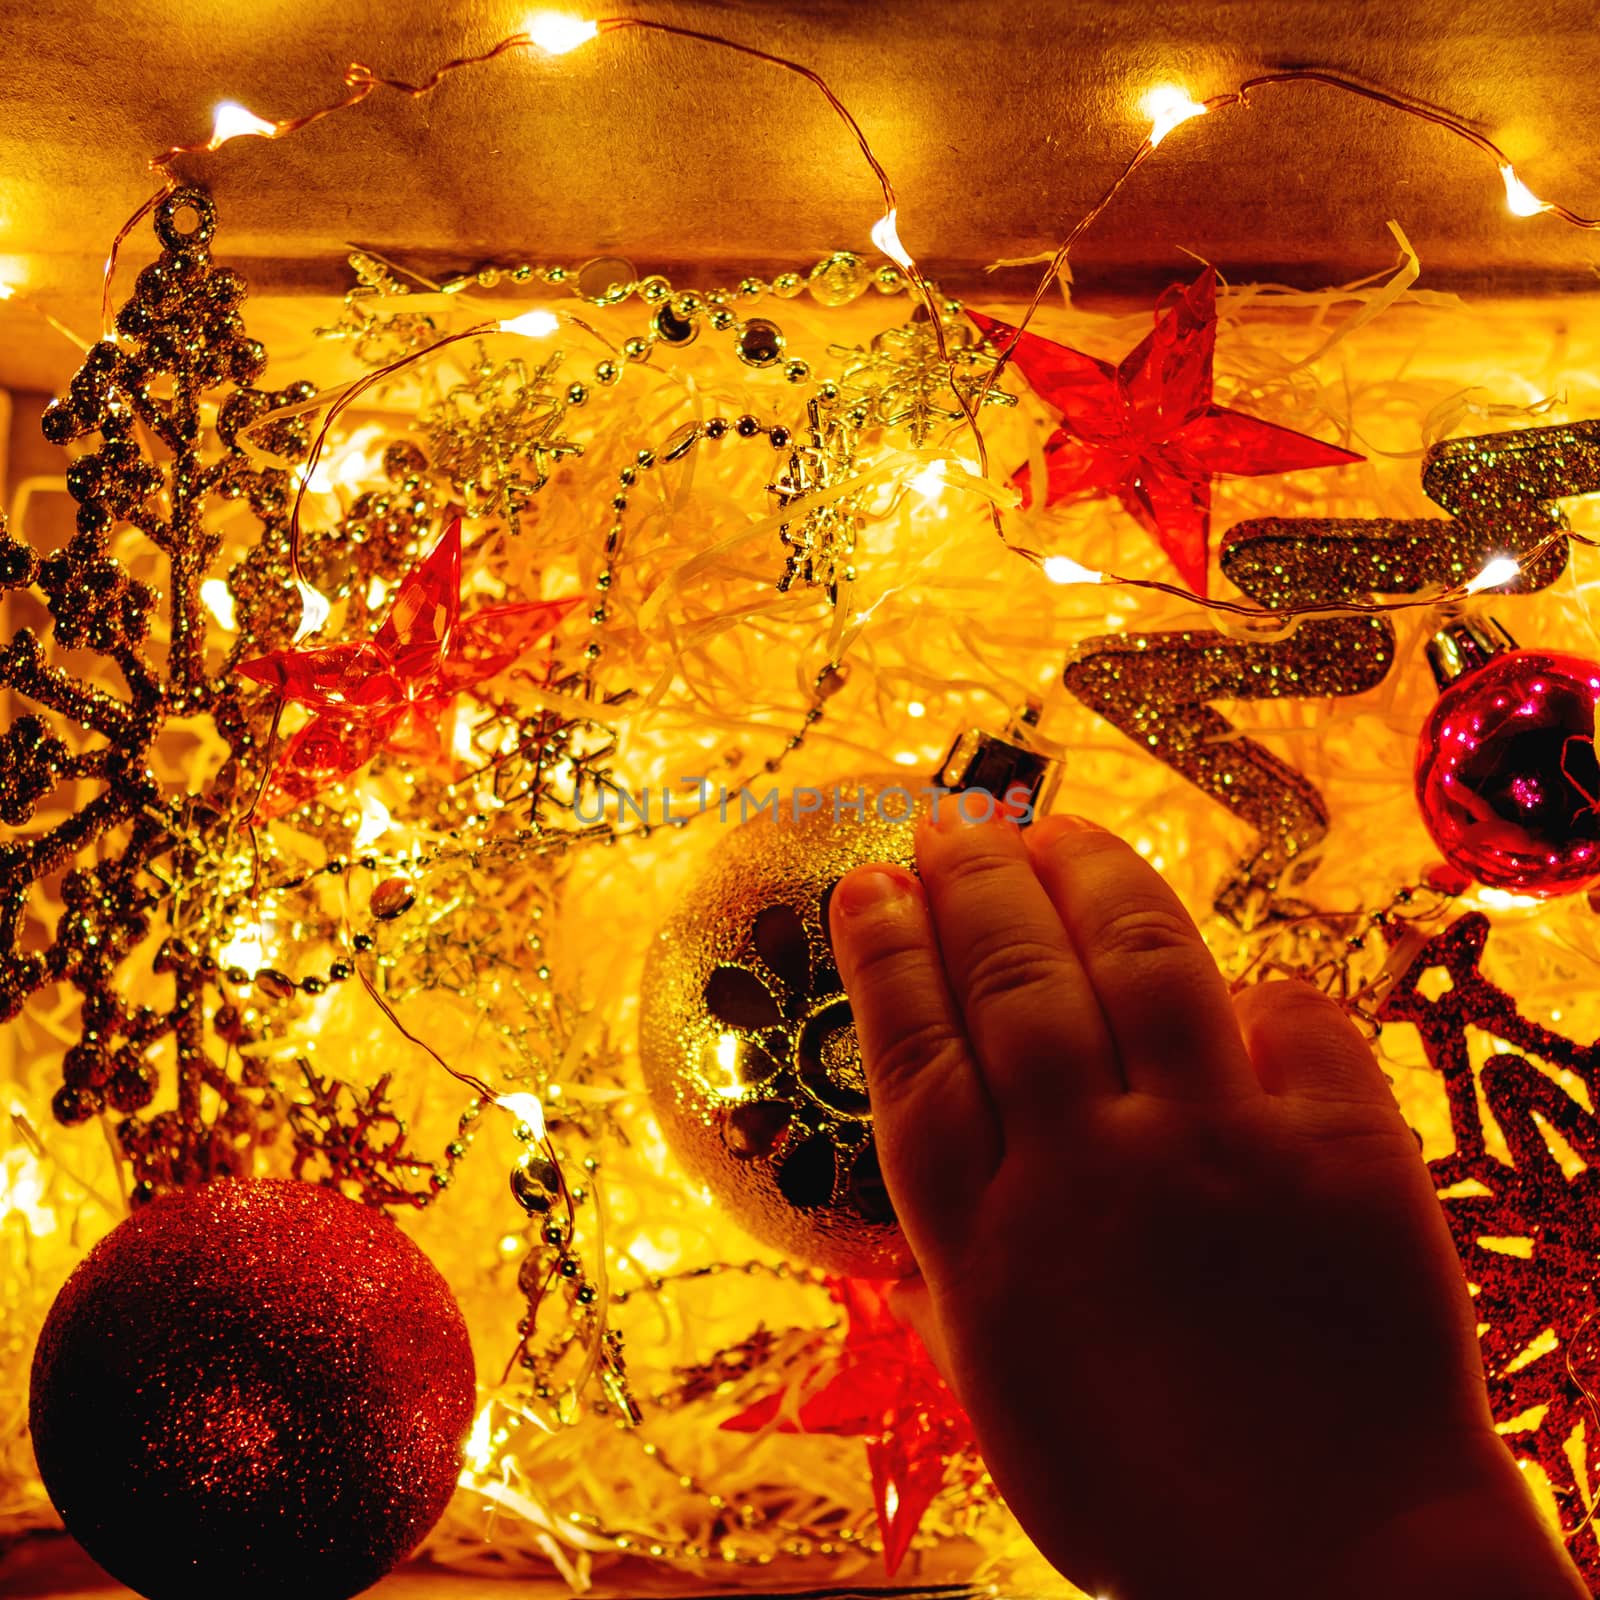 Cardboard box with Christmas and New Year decorations and light bulbs. Little baby touching golden sparkling ball with flower.